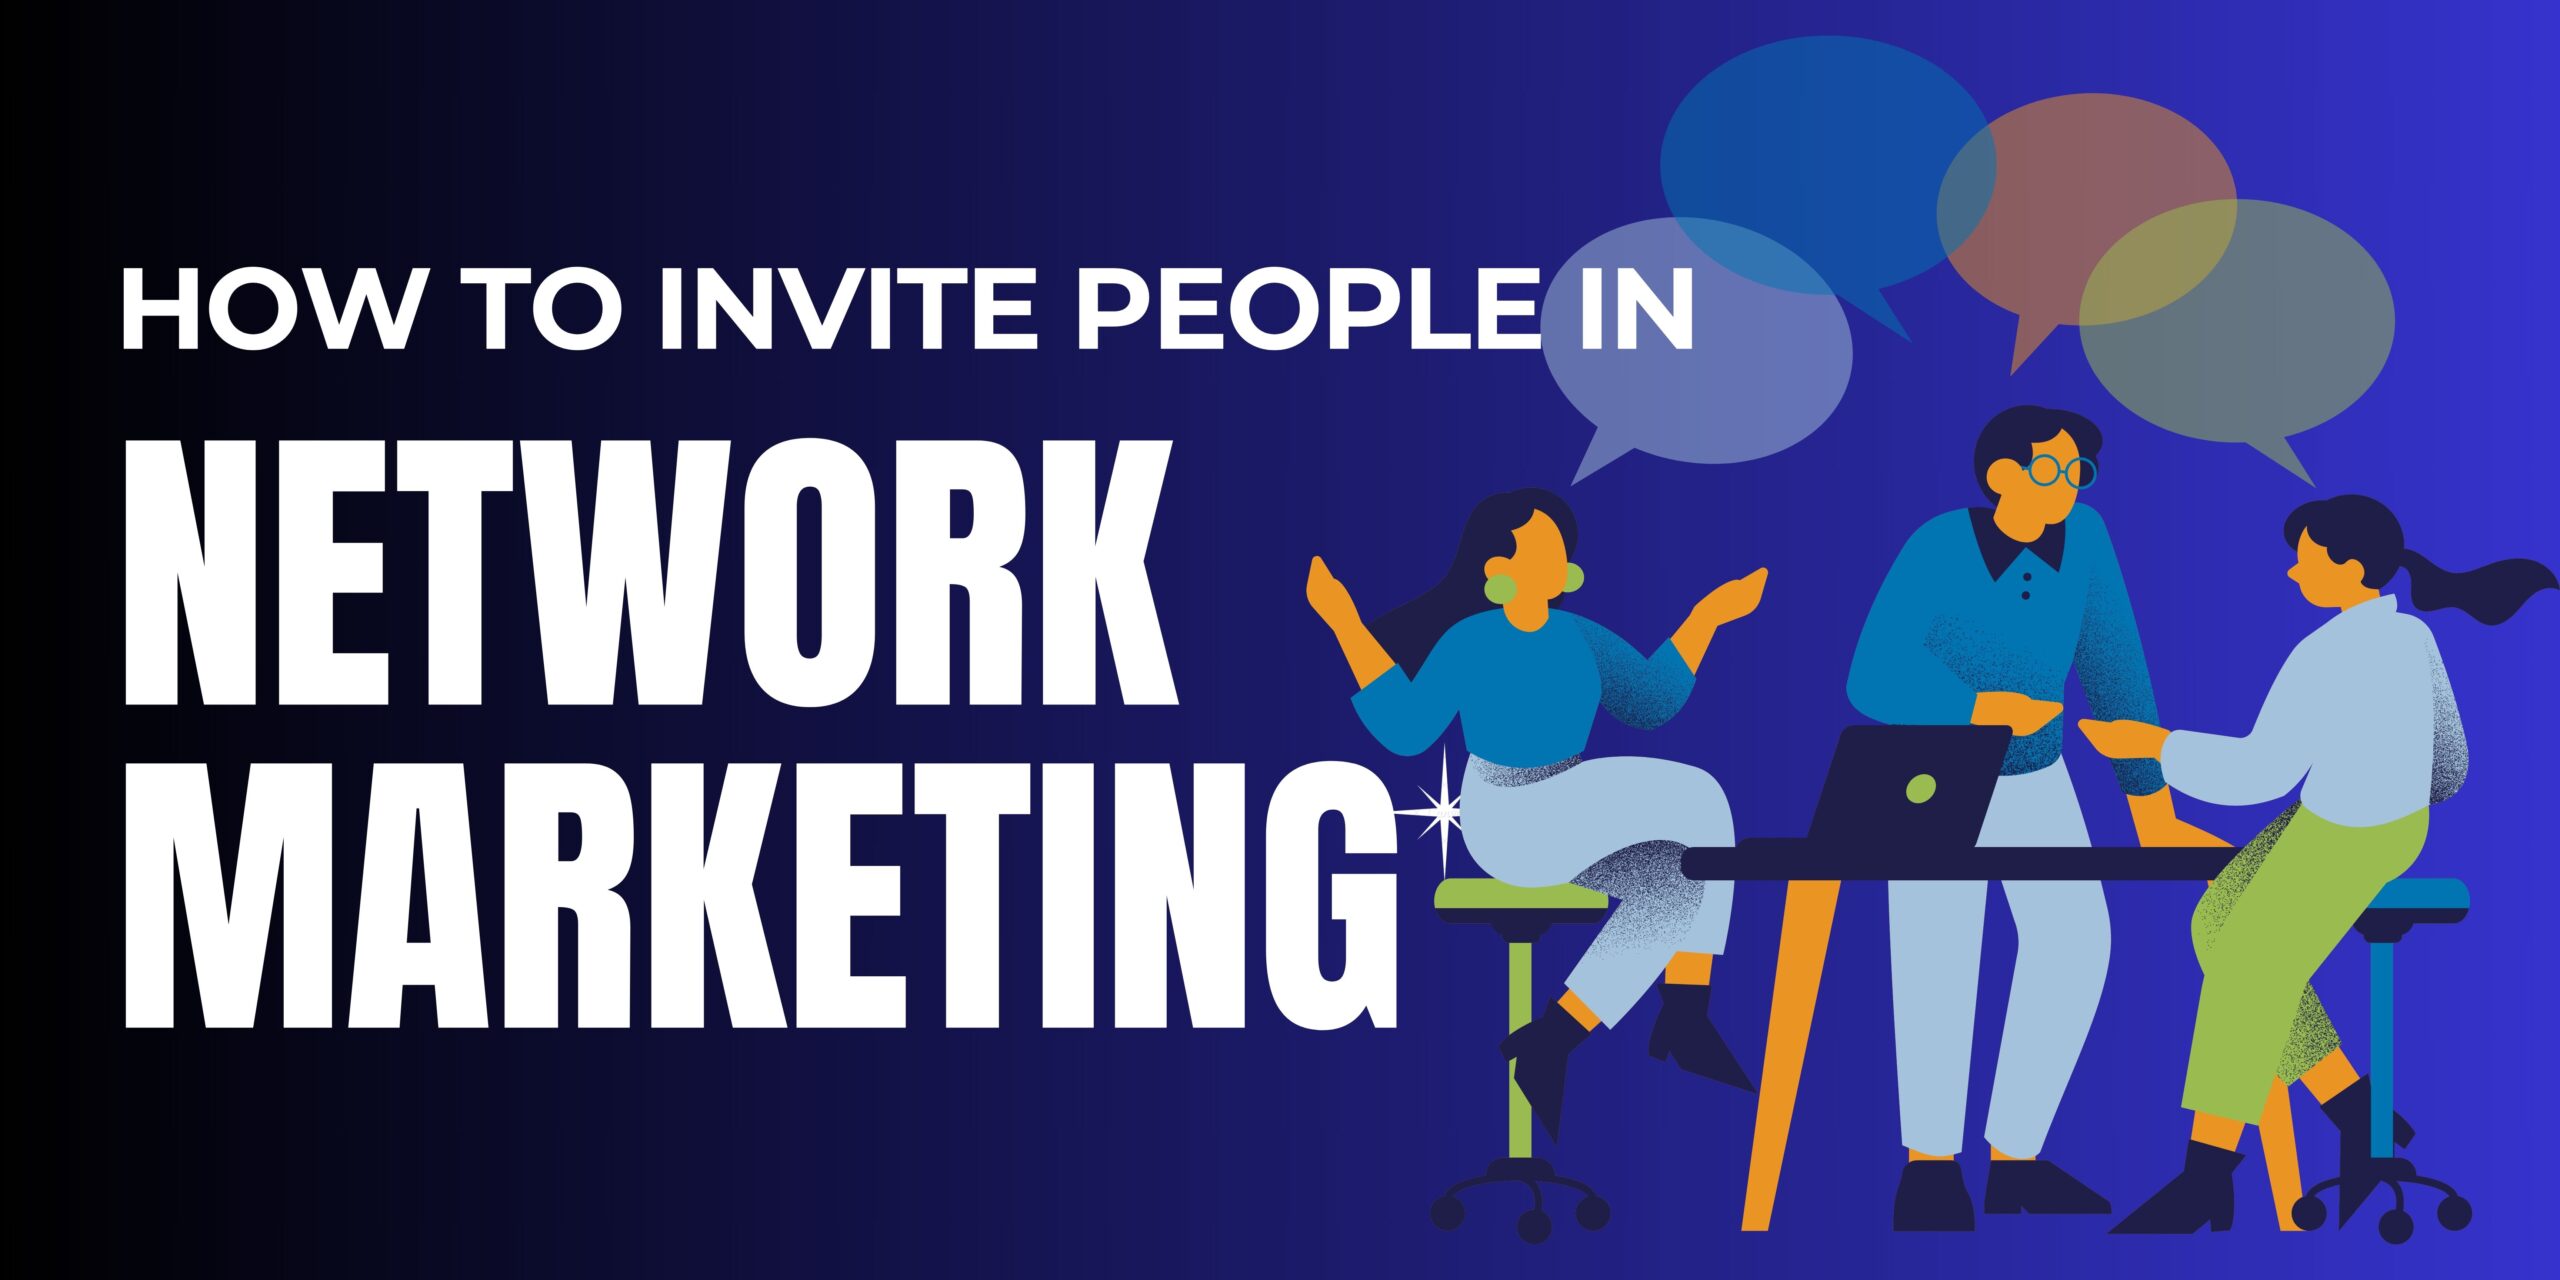 How to Invite People in Network Marketing 10 Effective Tips